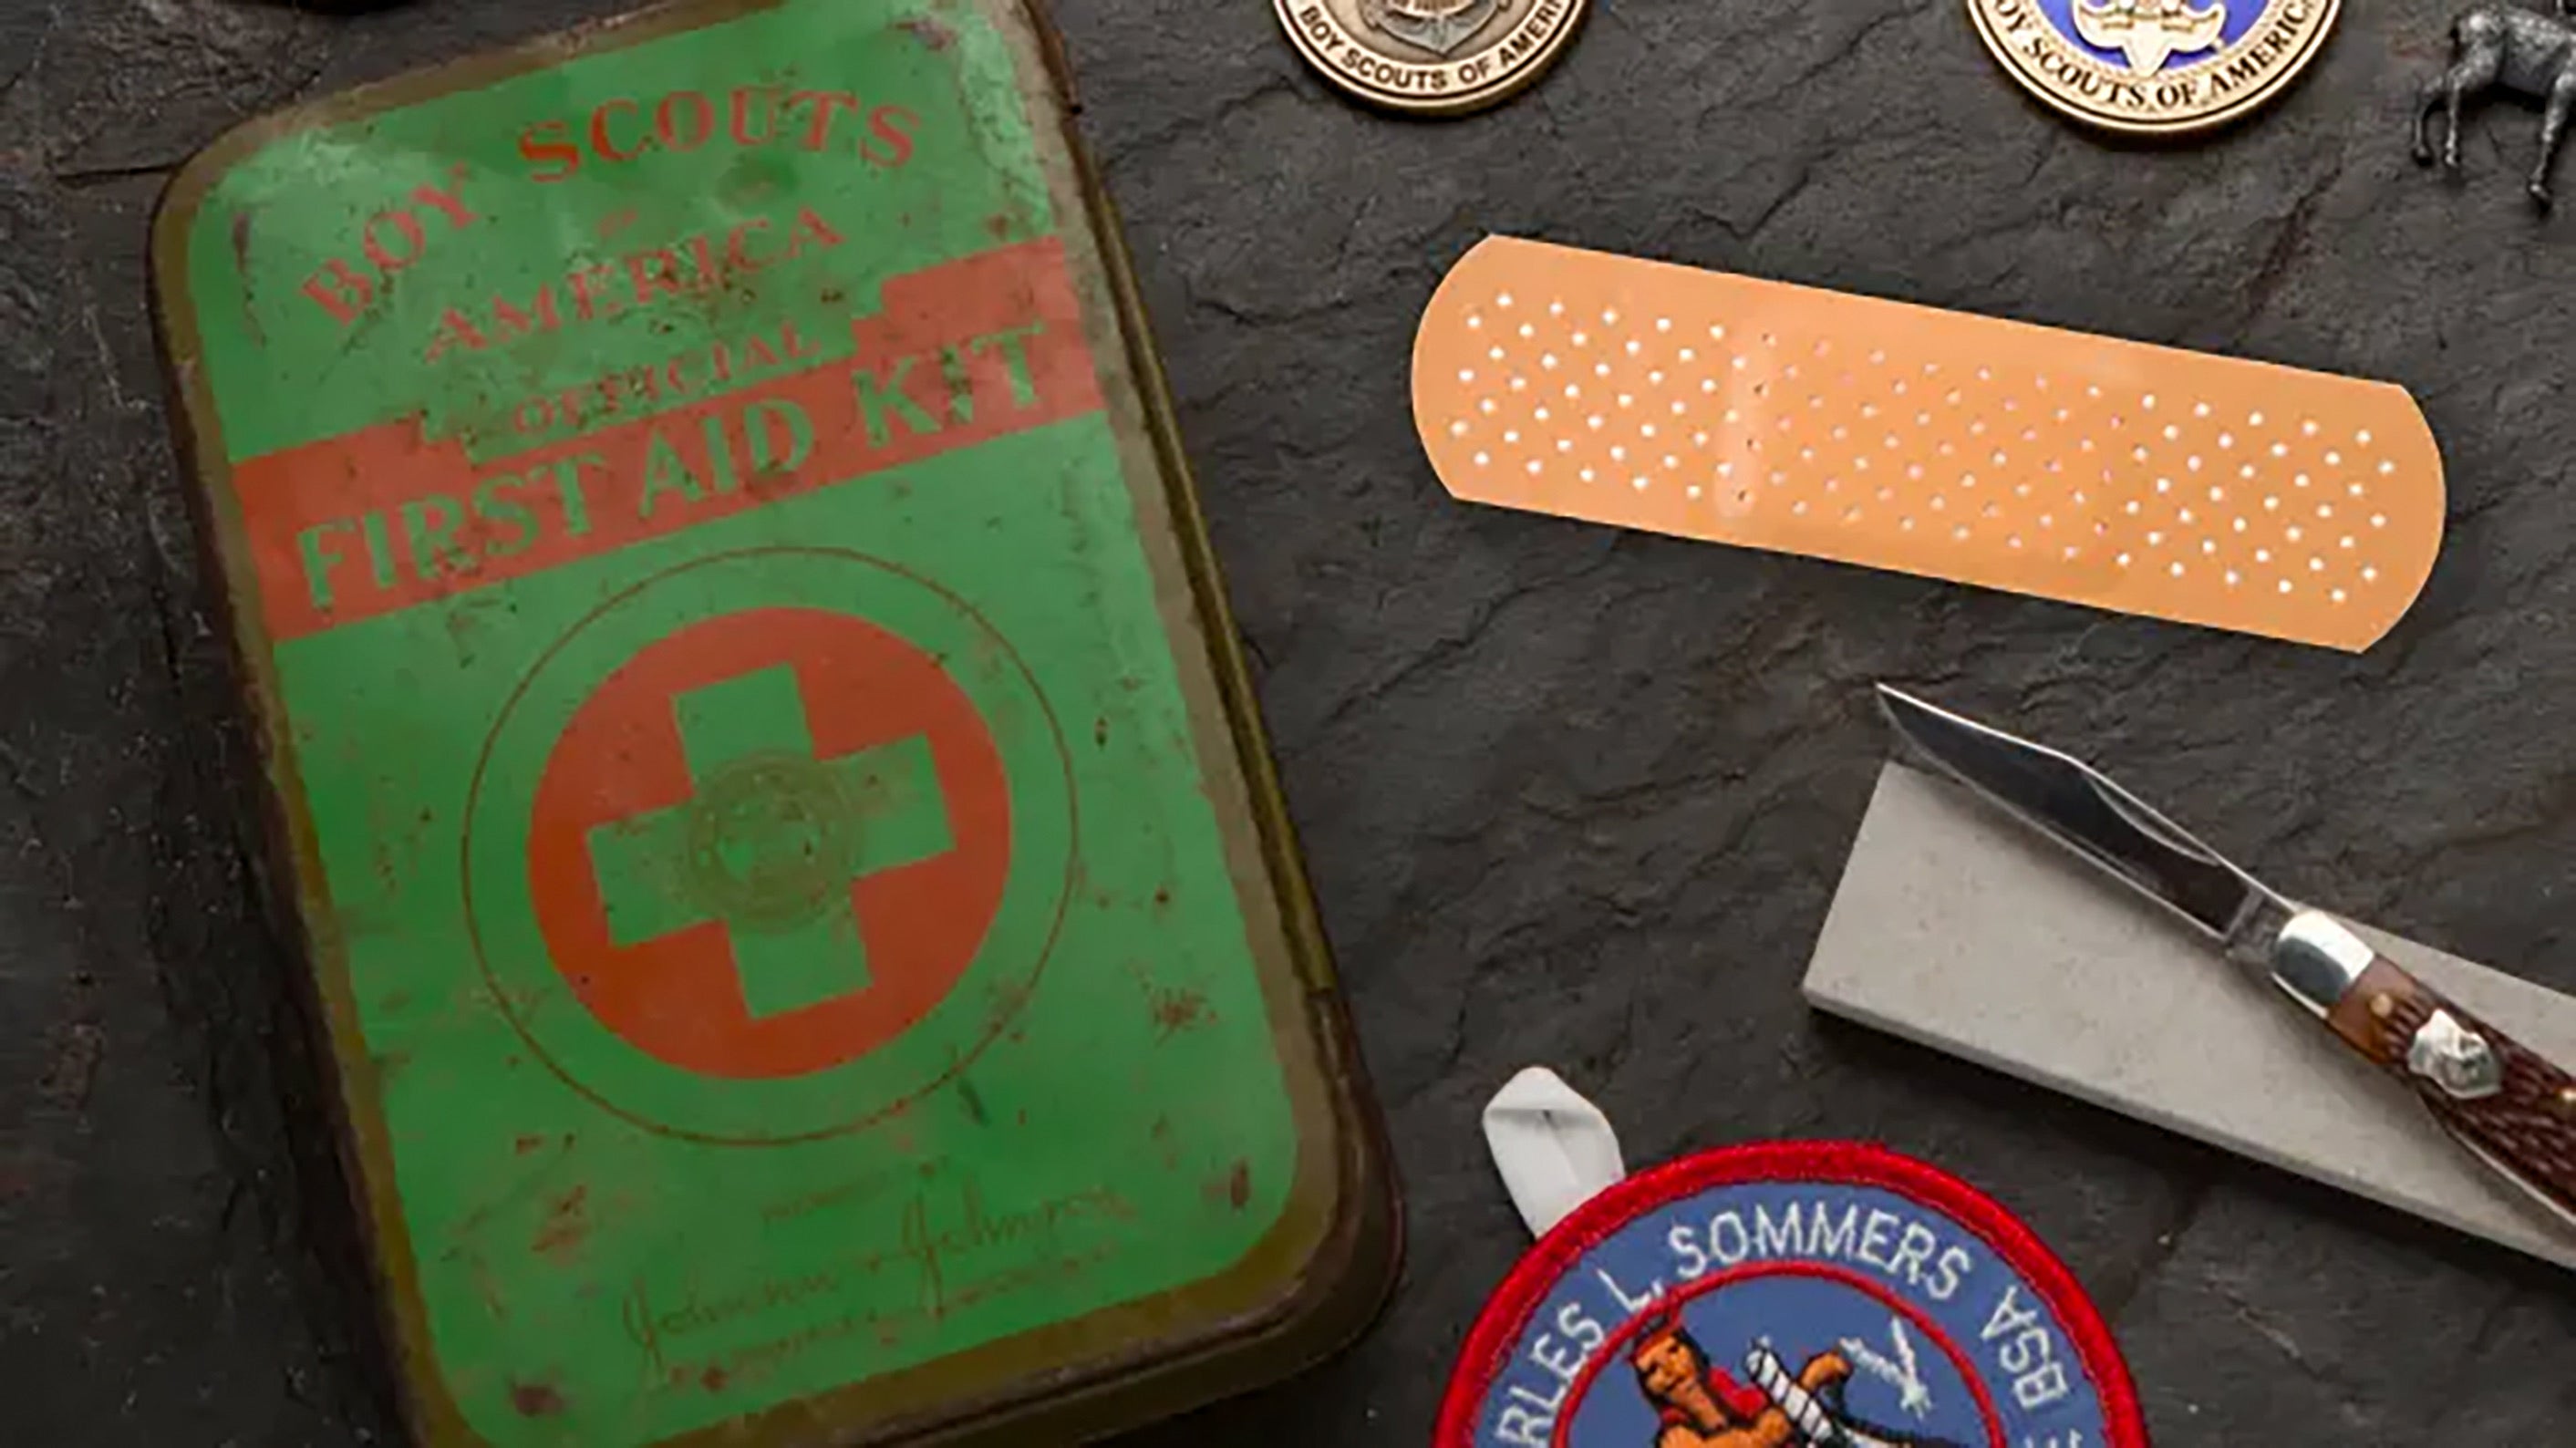 Johnson & Johnson helped popularize Band-Aids by packing them in first-aid kits for Boy Scouts. After an initial kit came in a simple cardboard box, Johnson & Johnson debuted an upgraded BSA first-aid kit in a tin box. Inside, scouts found burn and antibiotic creams, first-aid instructions and several kinds of bandages, including Band-Aids. (Boy Scouts of America)